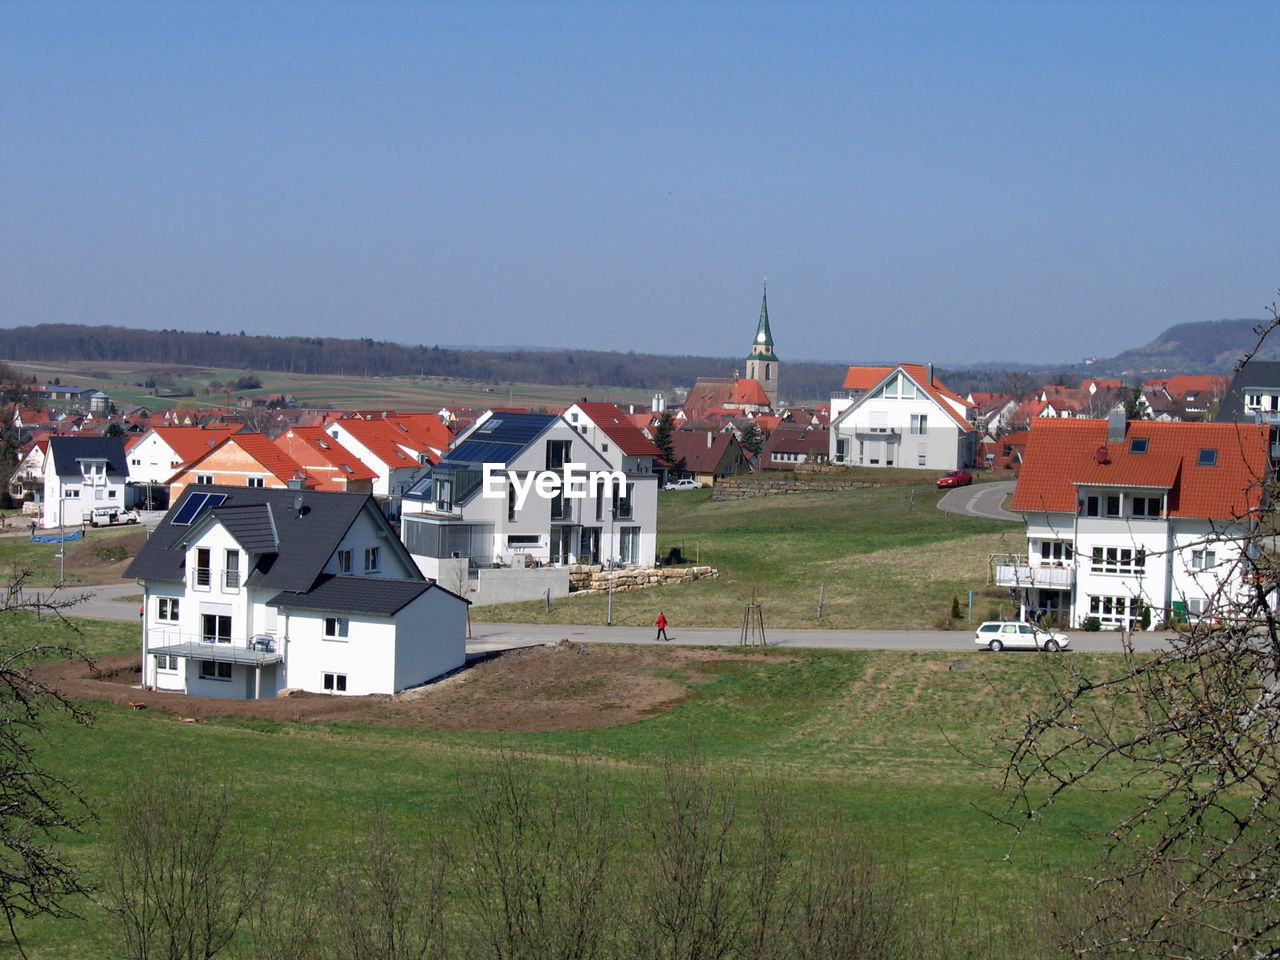 HOUSES AGAINST CLEAR SKY WITH GREEN LANDSCAPE IN BACKGROUND